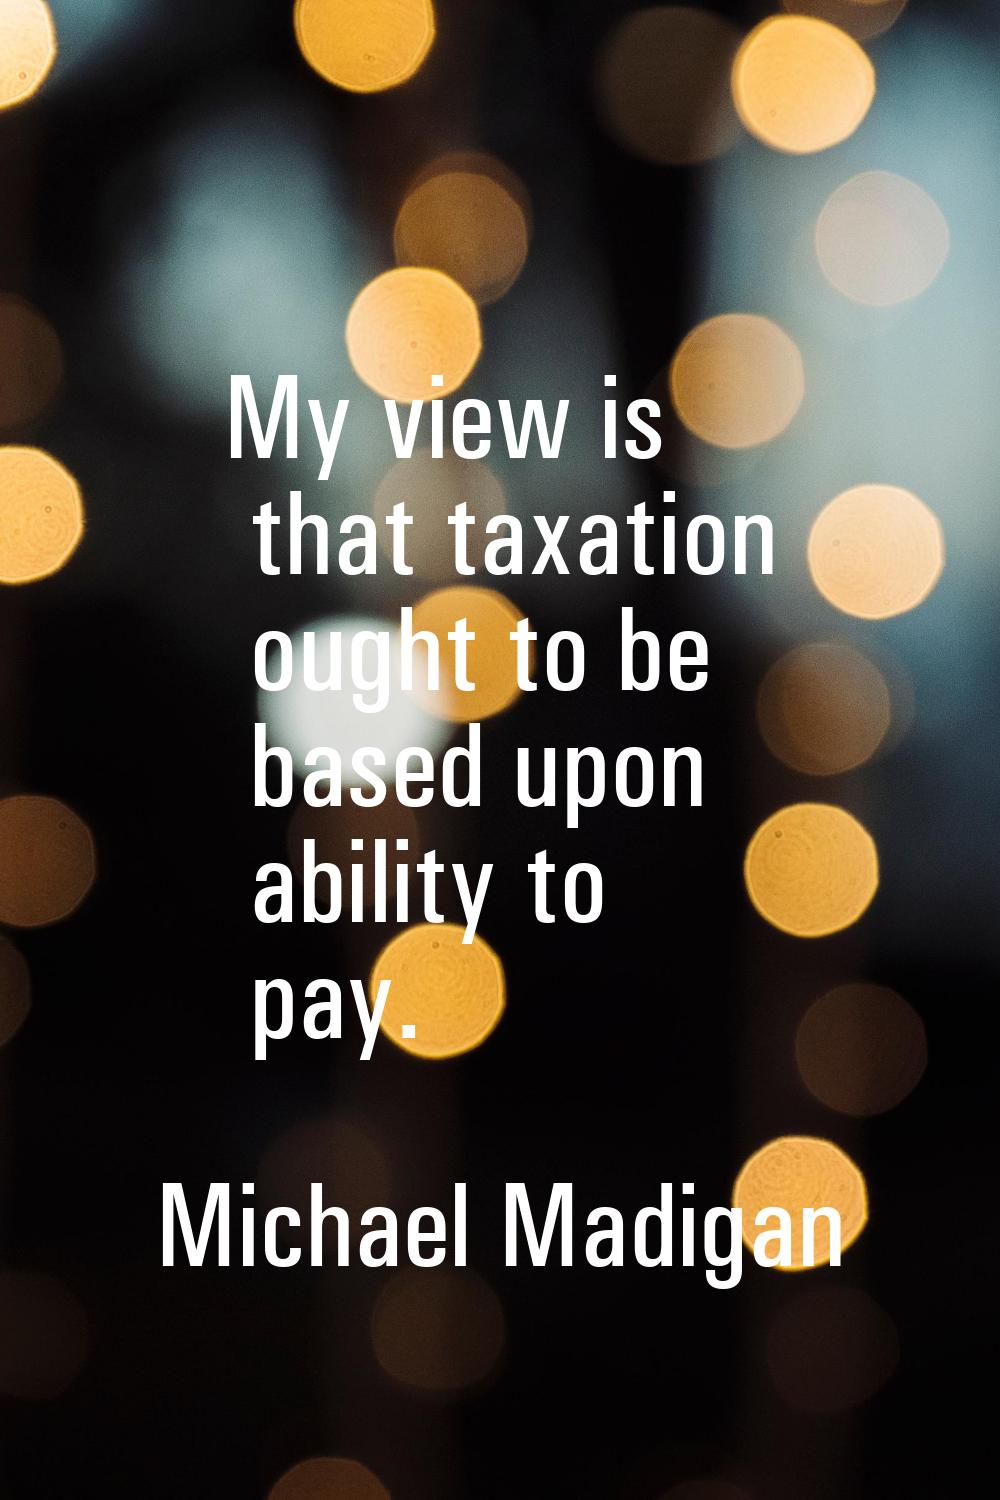 My view is that taxation ought to be based upon ability to pay.